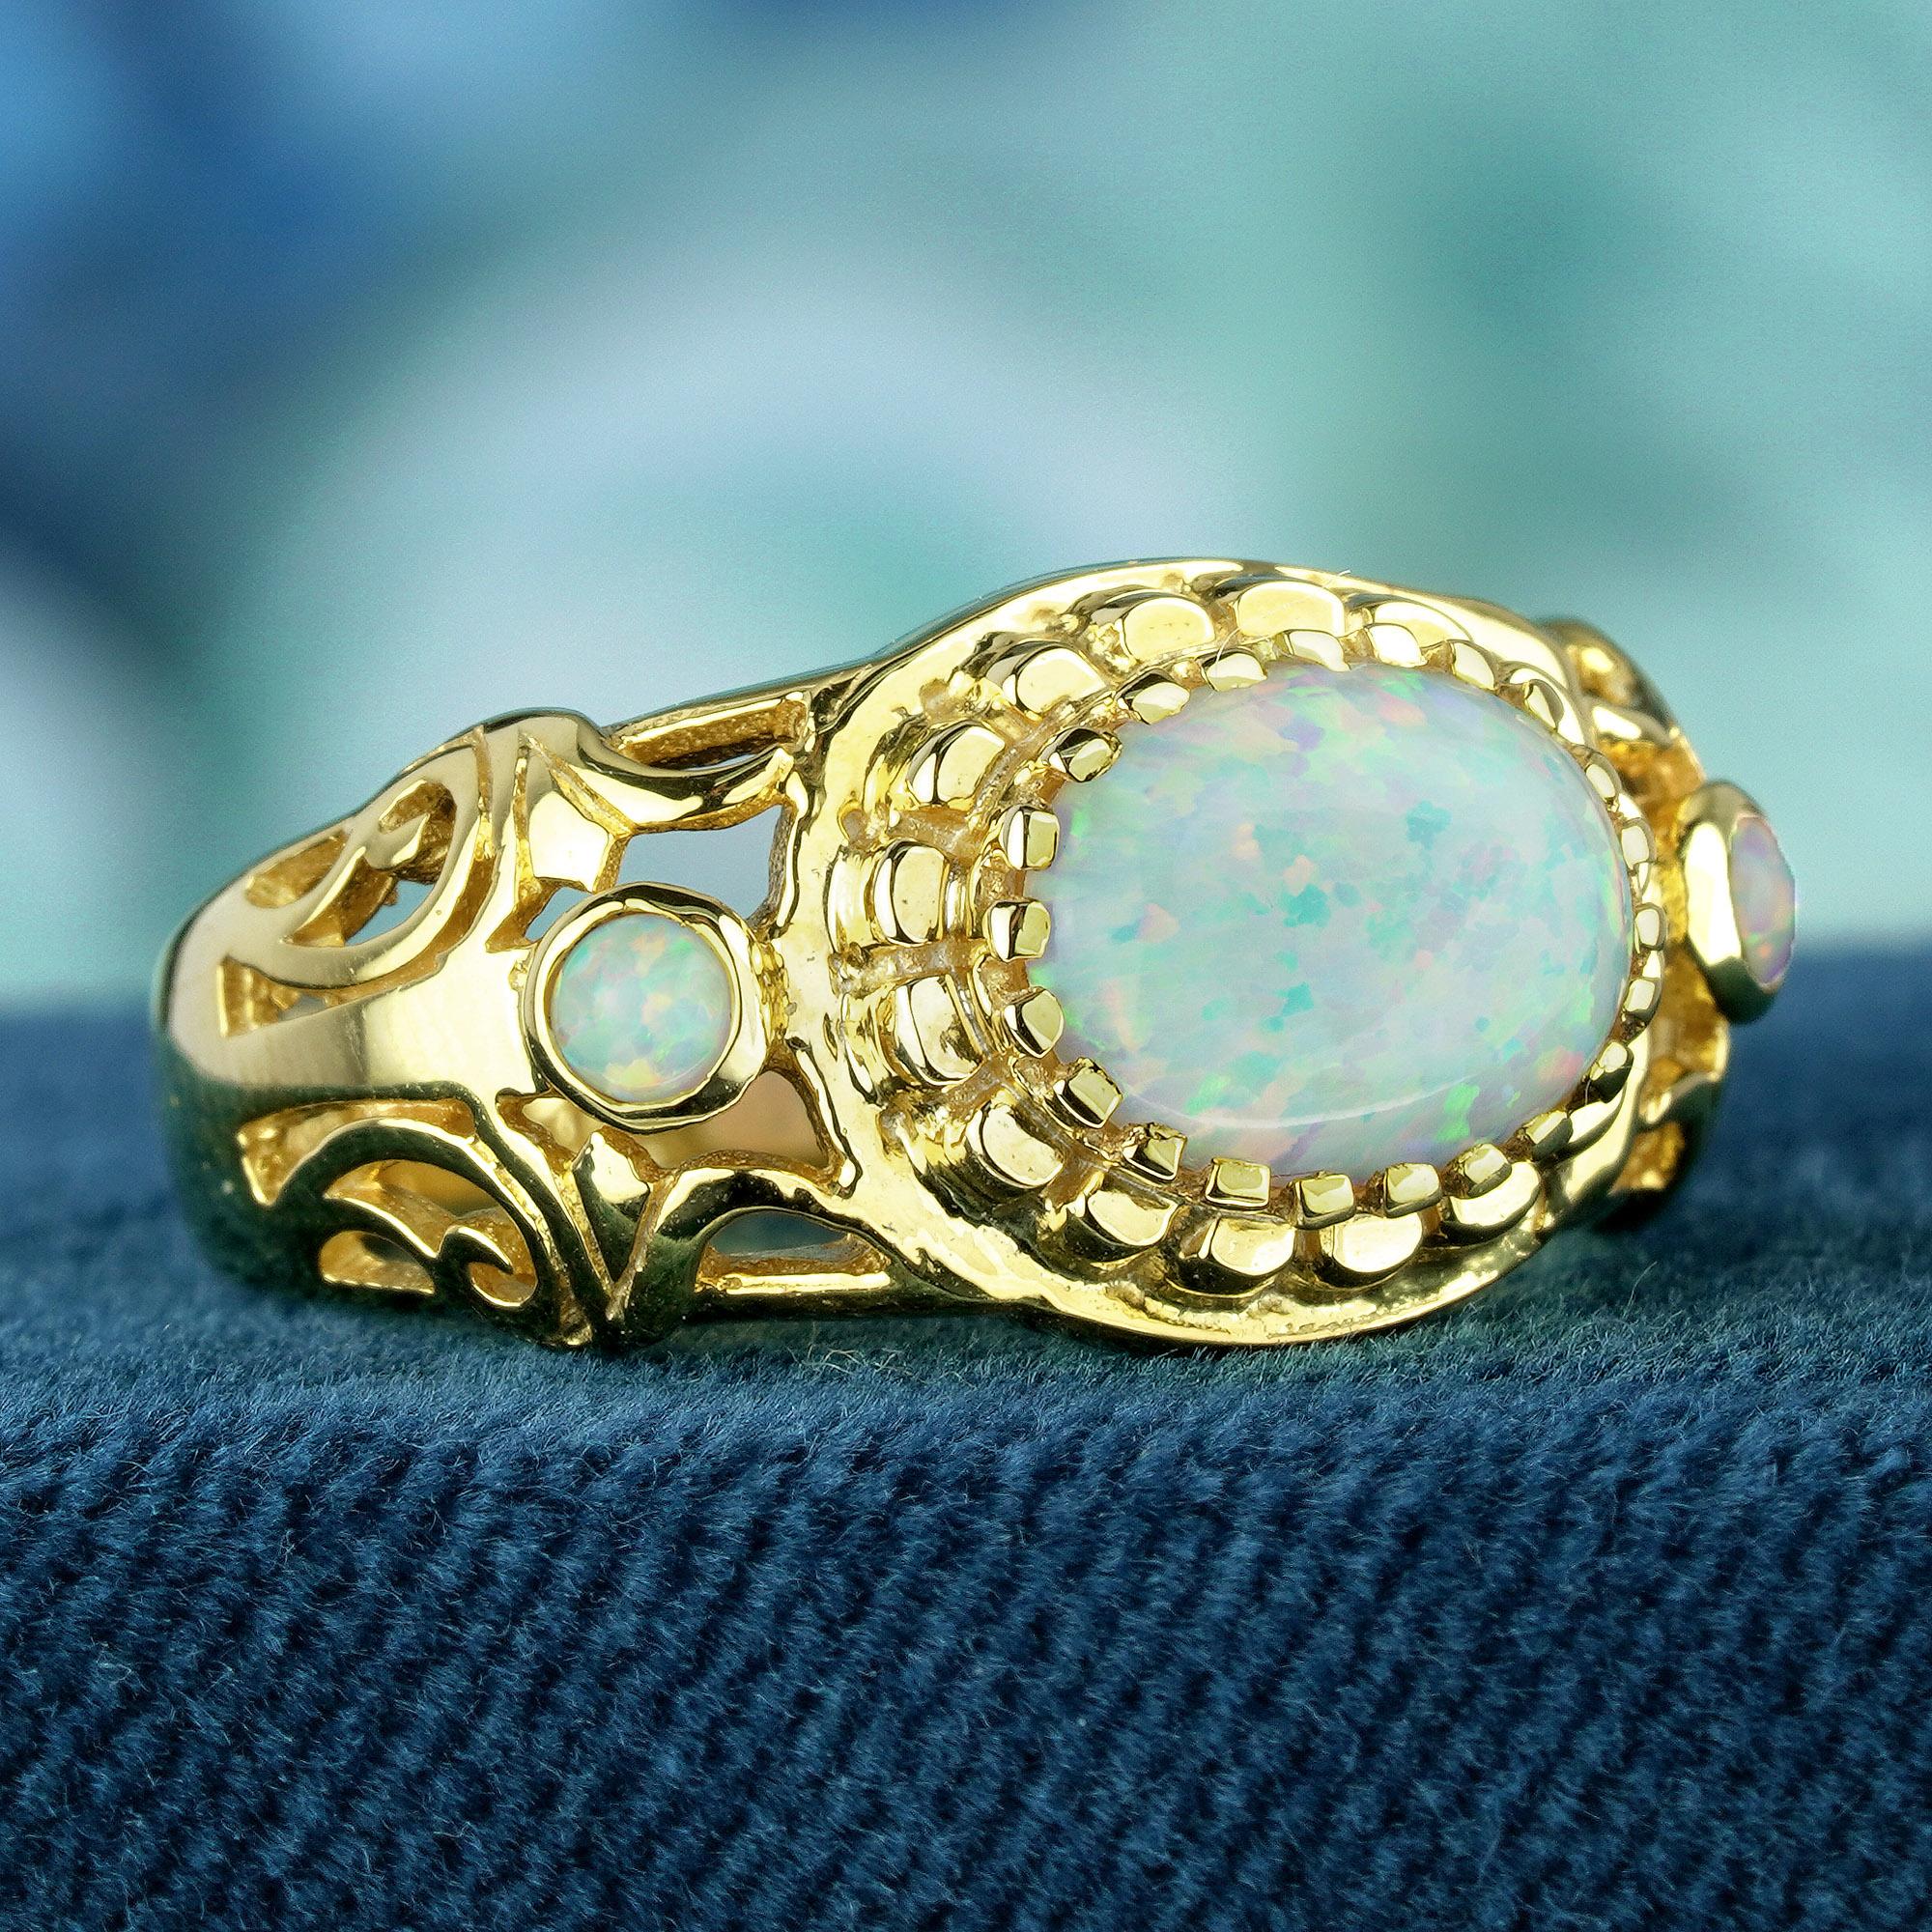 Elevate your elegance with a touch of vintage charm. Delight in the ethereal beauty of our vintage style ring, crafted in yellow gold. Featuring a stunning oval cabochon white opal as its centerpiece, complemented by round cabochon opal accents. The